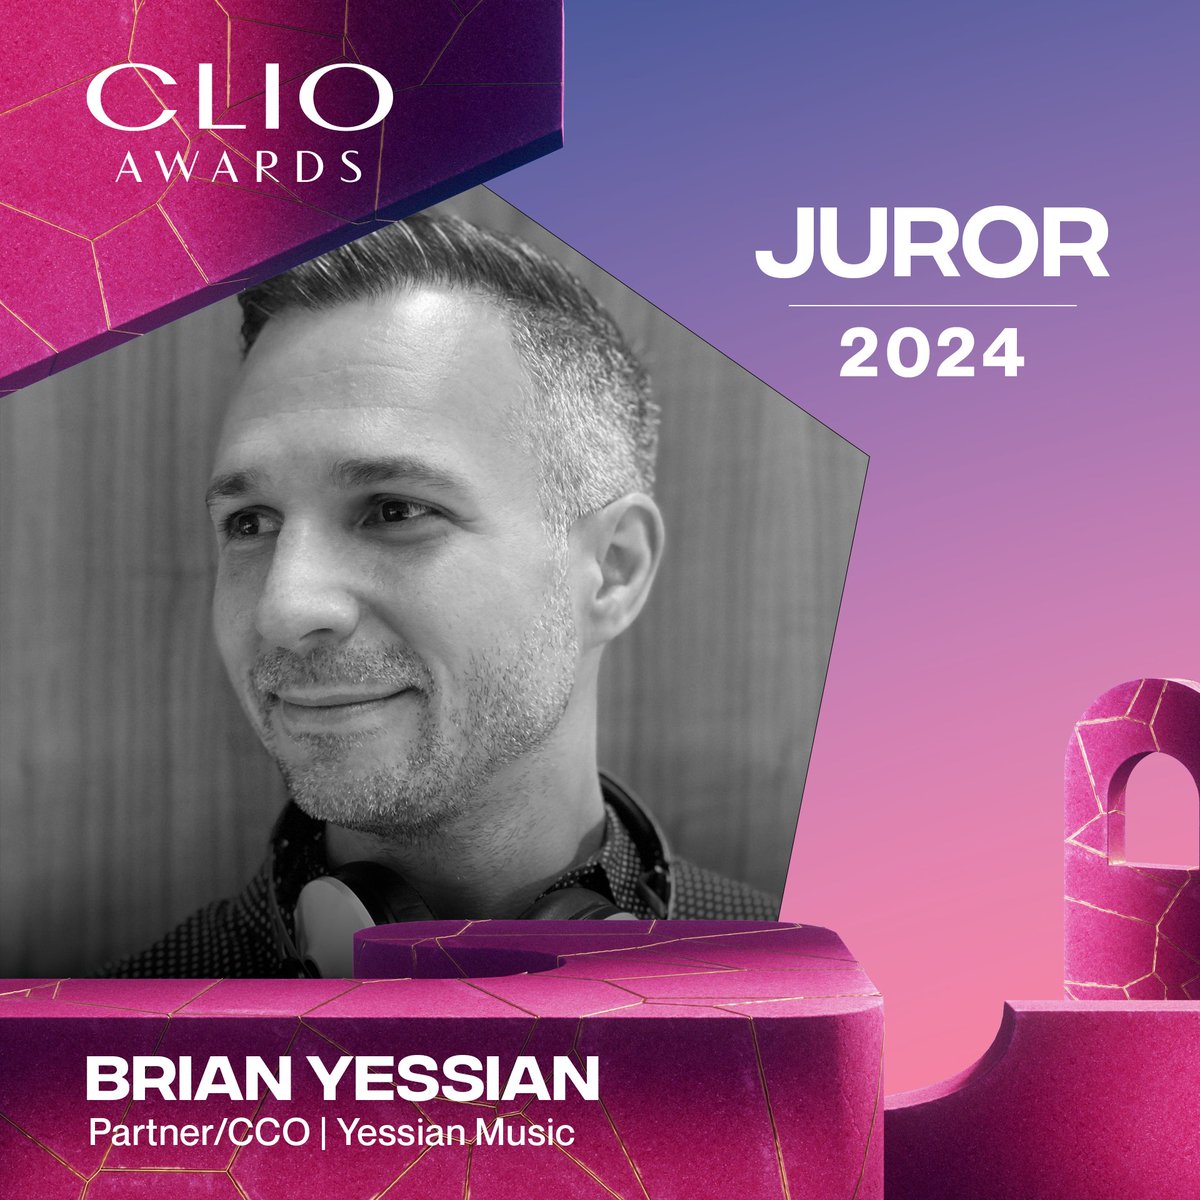 We are proud to announce that Brian is part of the Film Craft Music & Sound Design #Jury at the @ClioAwards 2024‼ 🚀

#Submit your work now!

#yessian #yessianmusic #feelthepowerofsound #clioawards #jury #announcement #submitnow